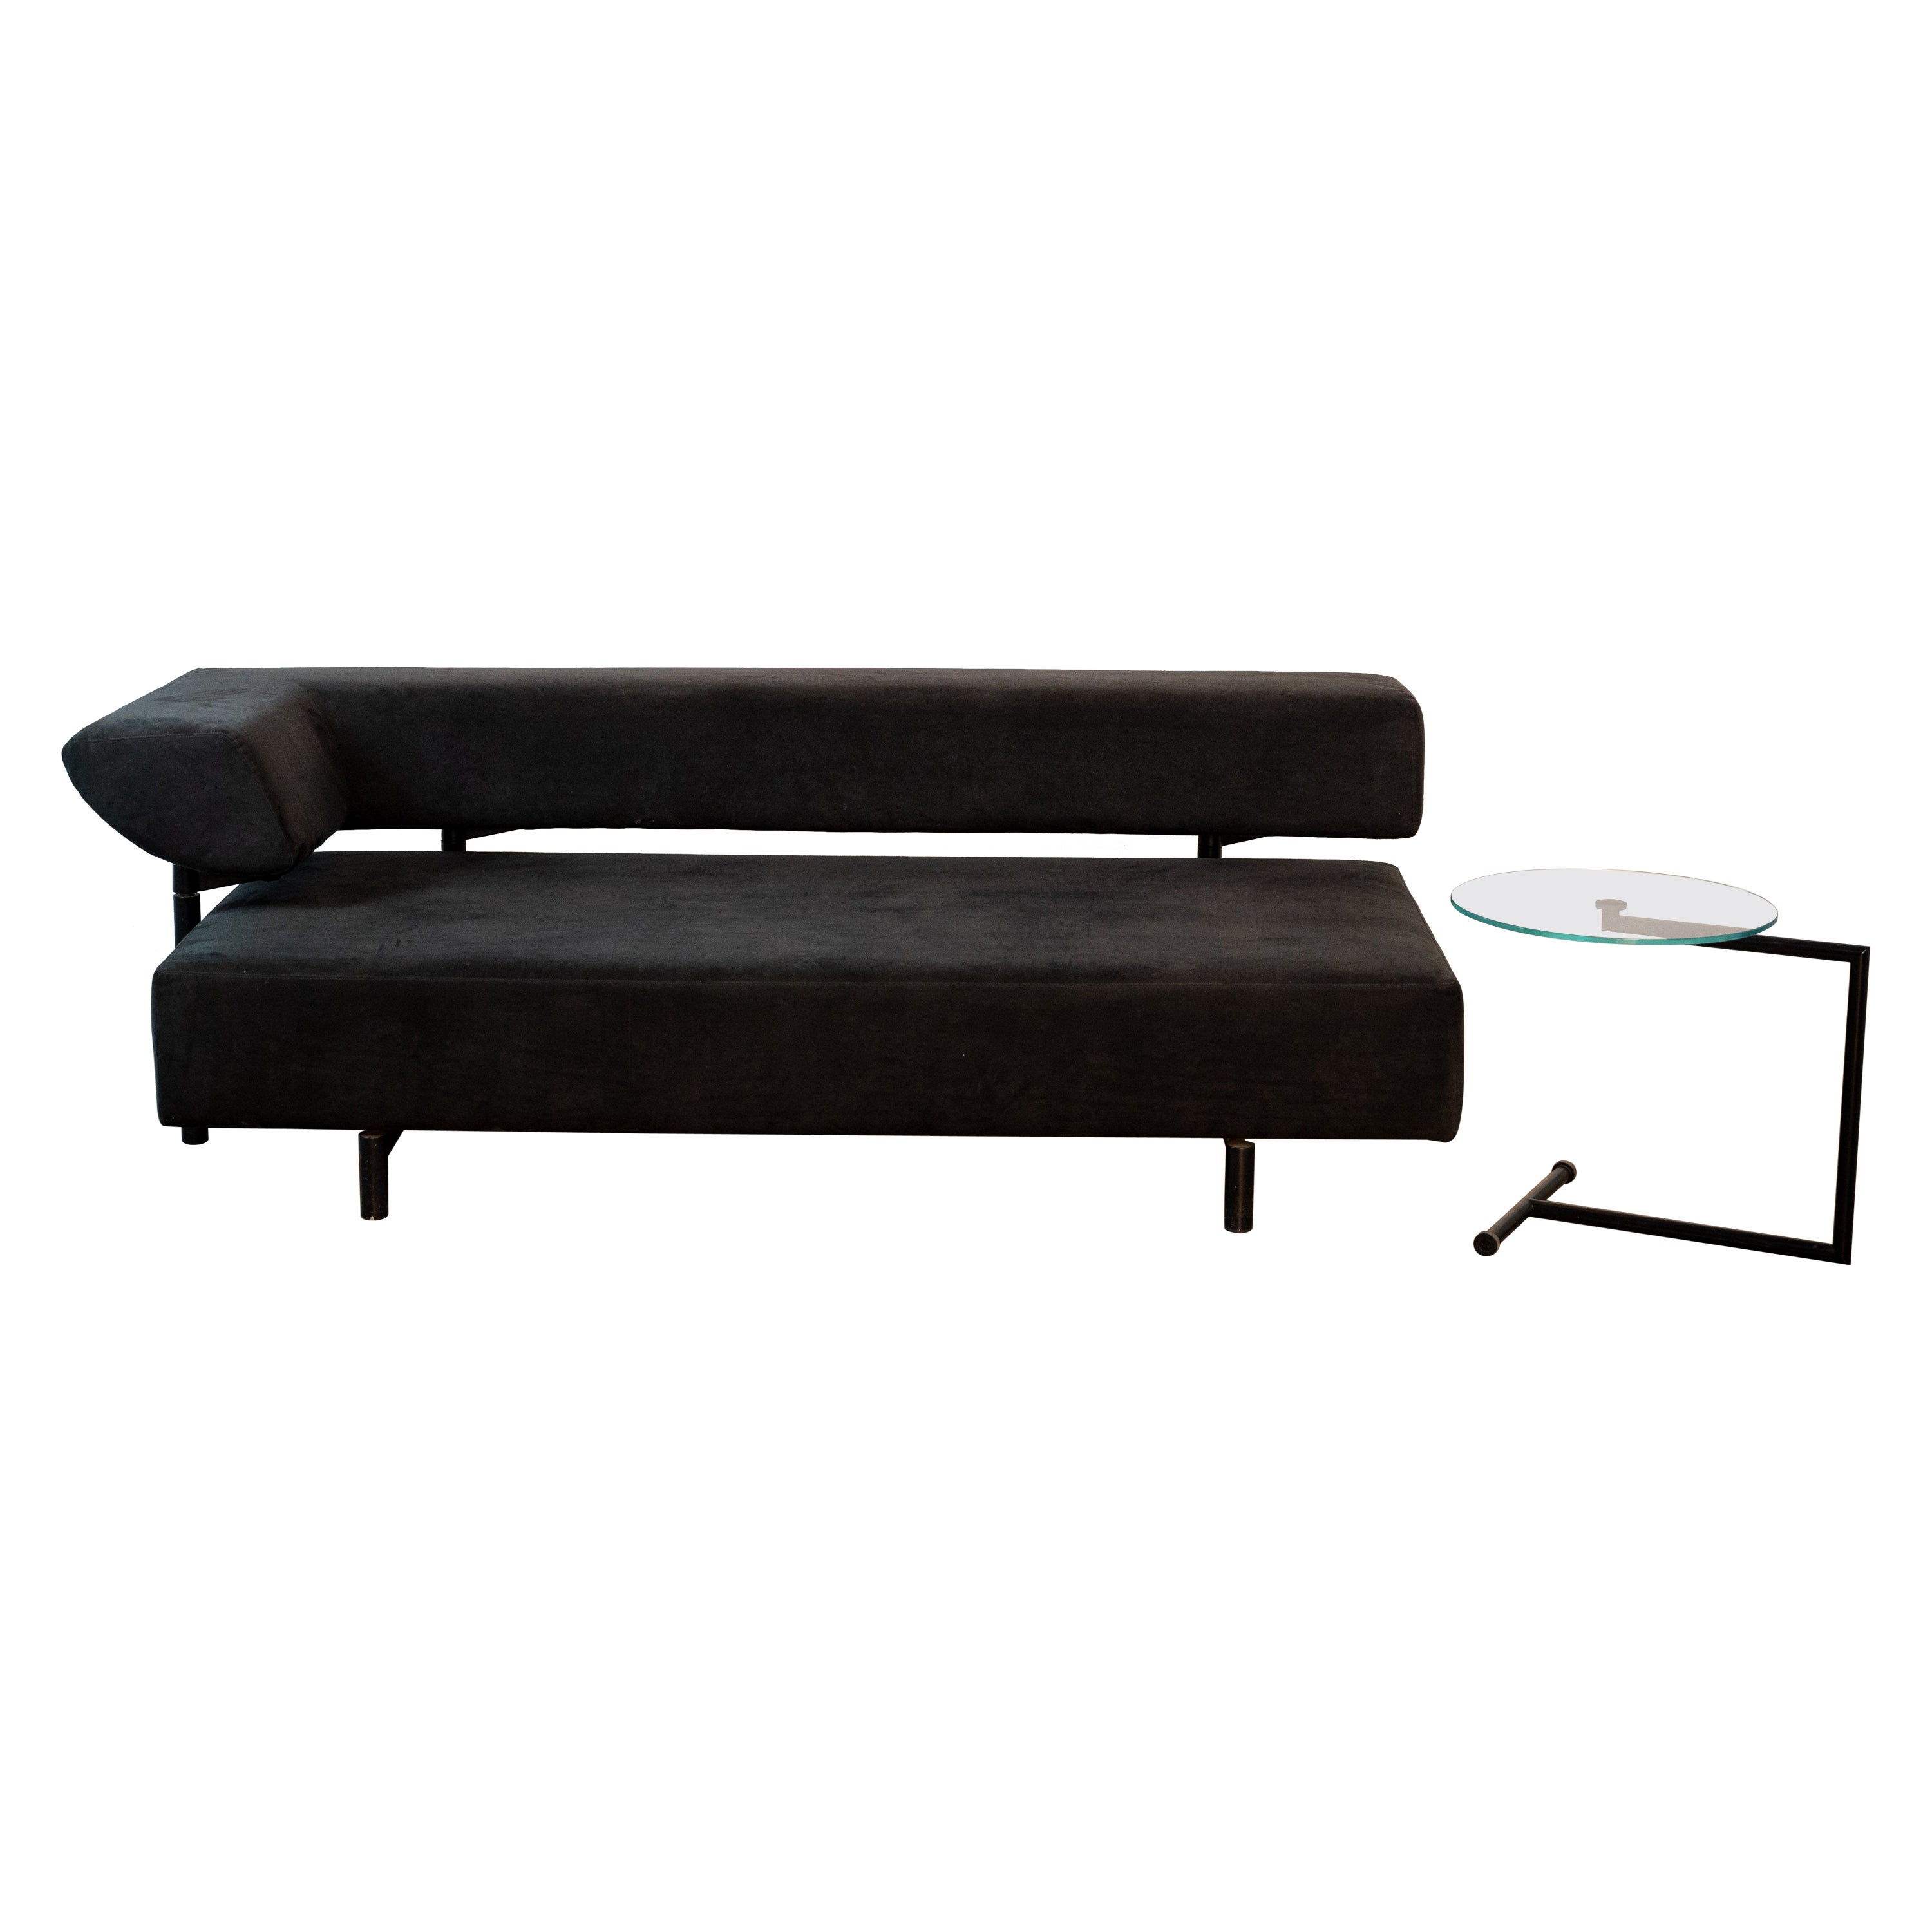 COR Arthe Sofa / Daybed by Wulf Schneider with original side table